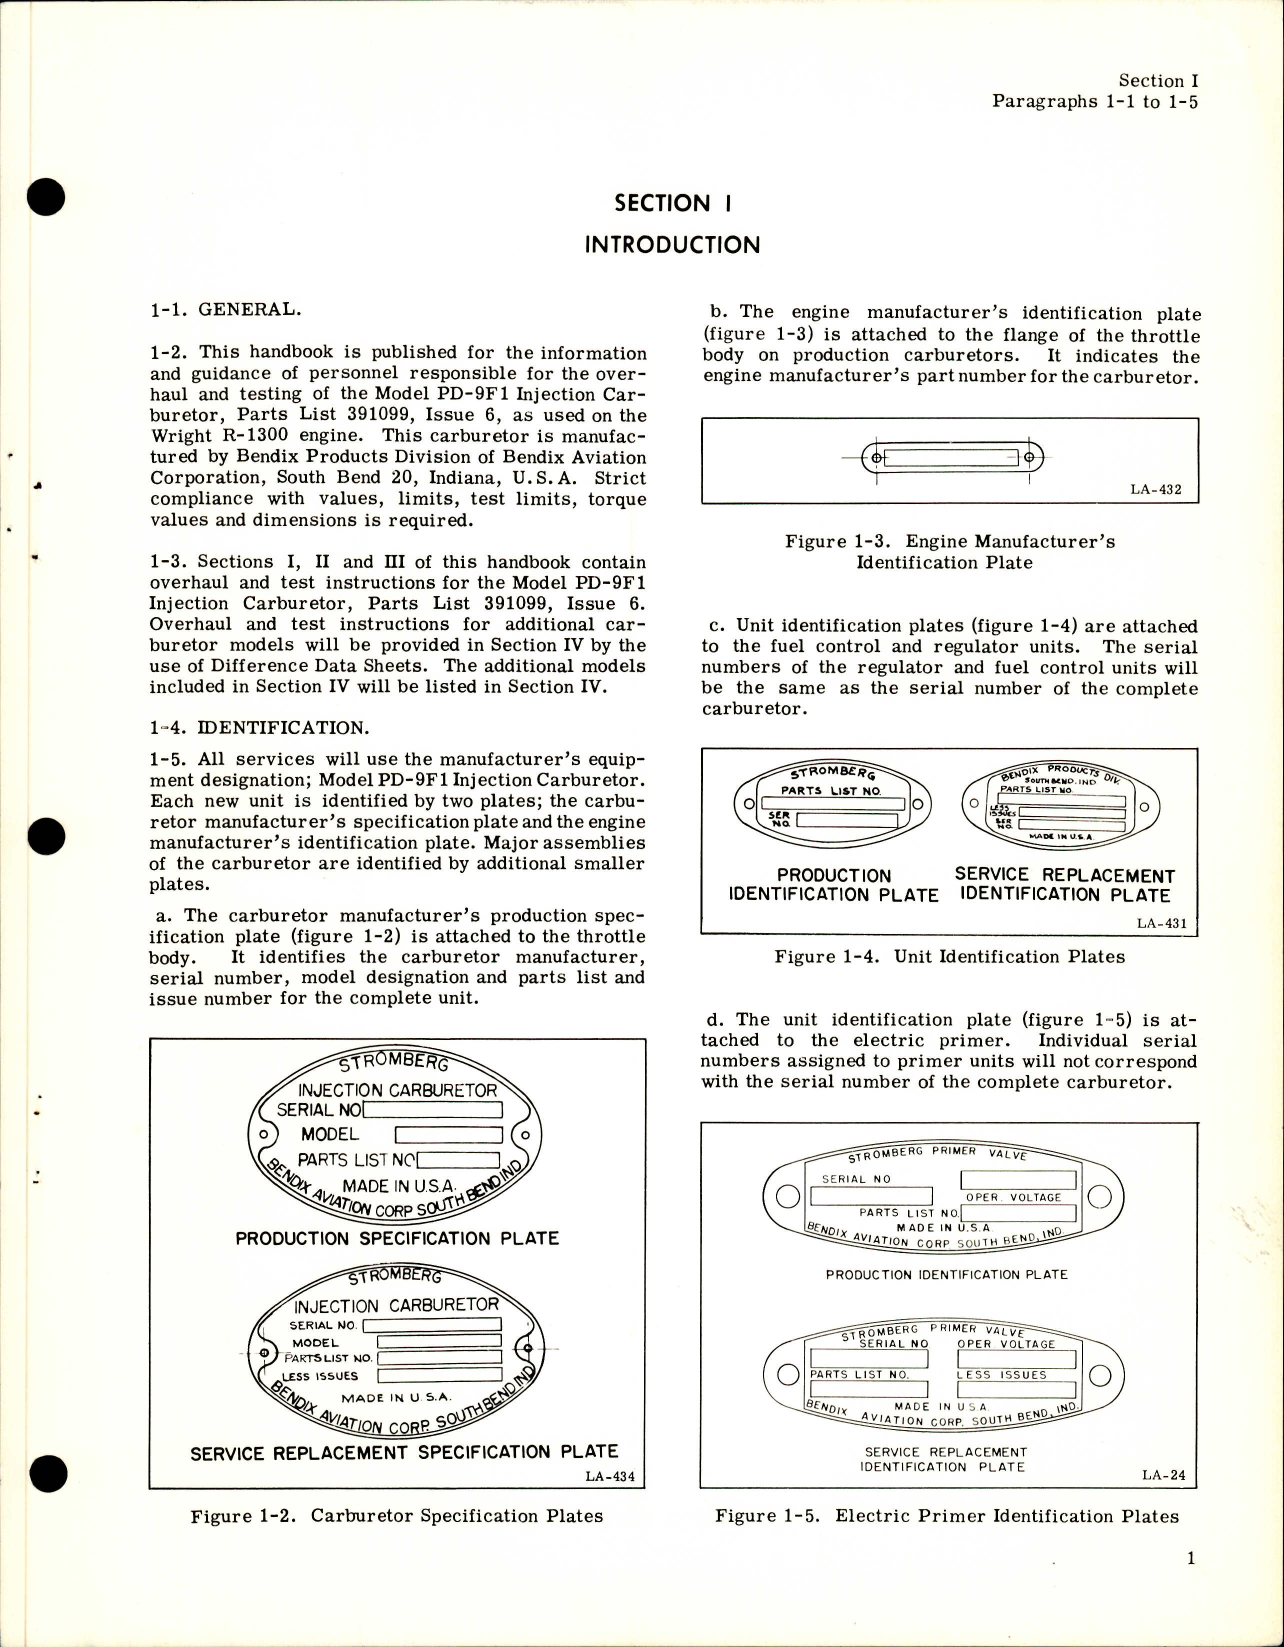 Sample page 5 from AirCorps Library document: Overhaul Instructions for Injection Carburetors Model PD-9F1 Used on R-1300 Engines